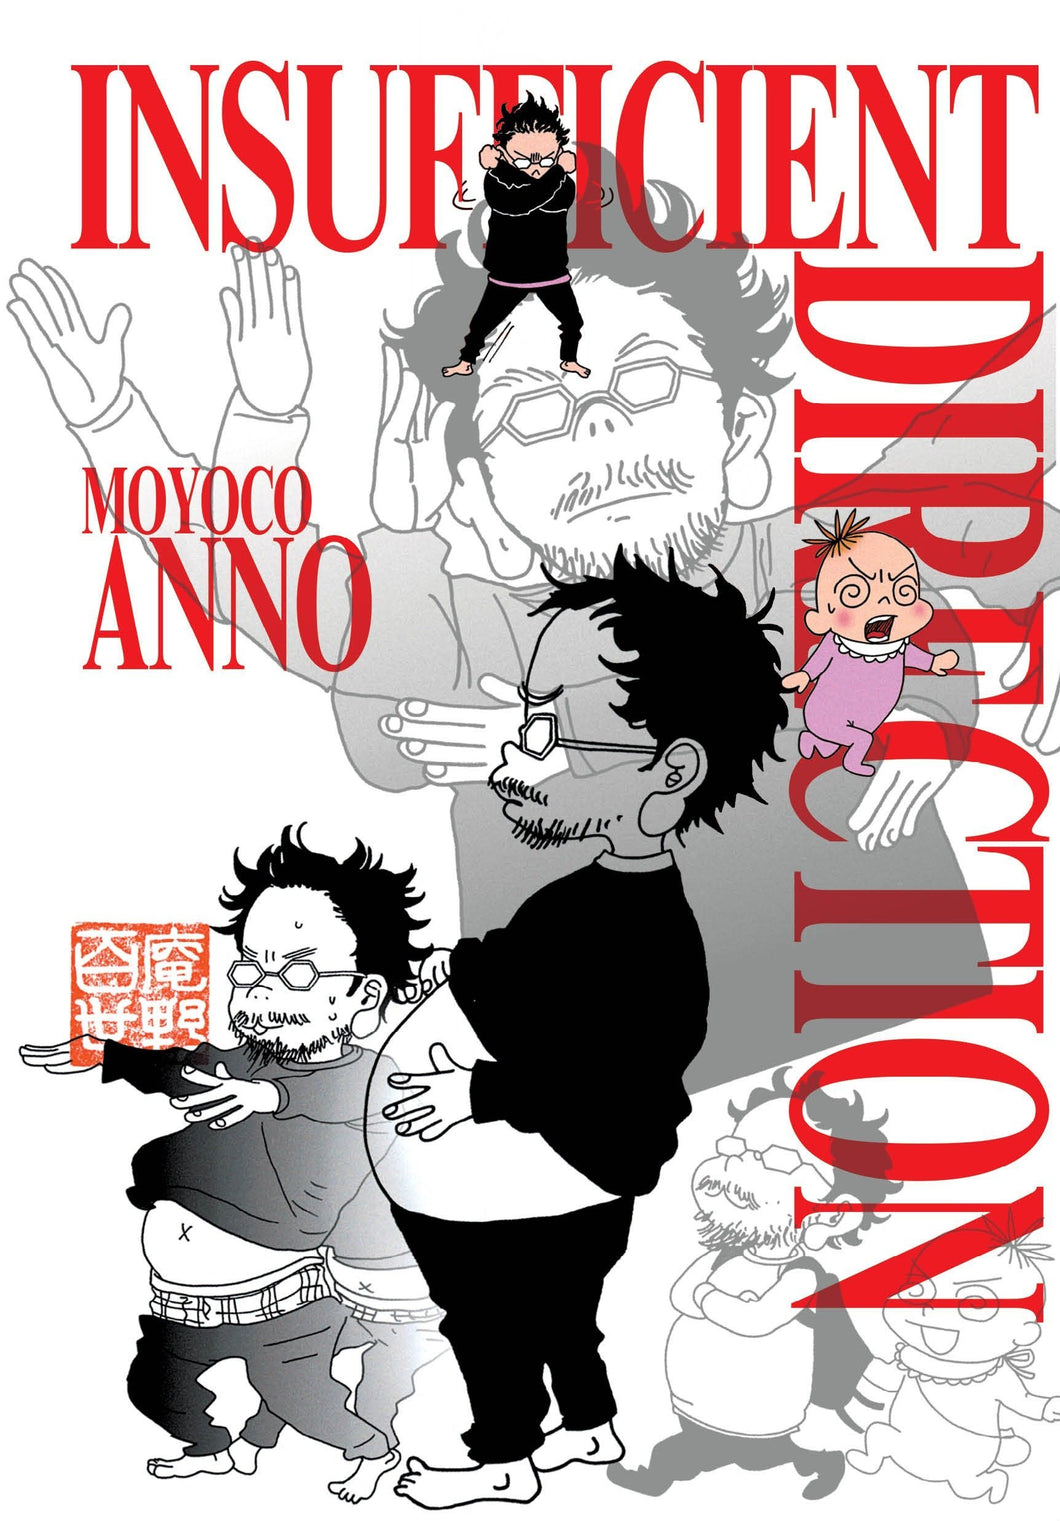 Insufficient Direction by Moyoco Anno